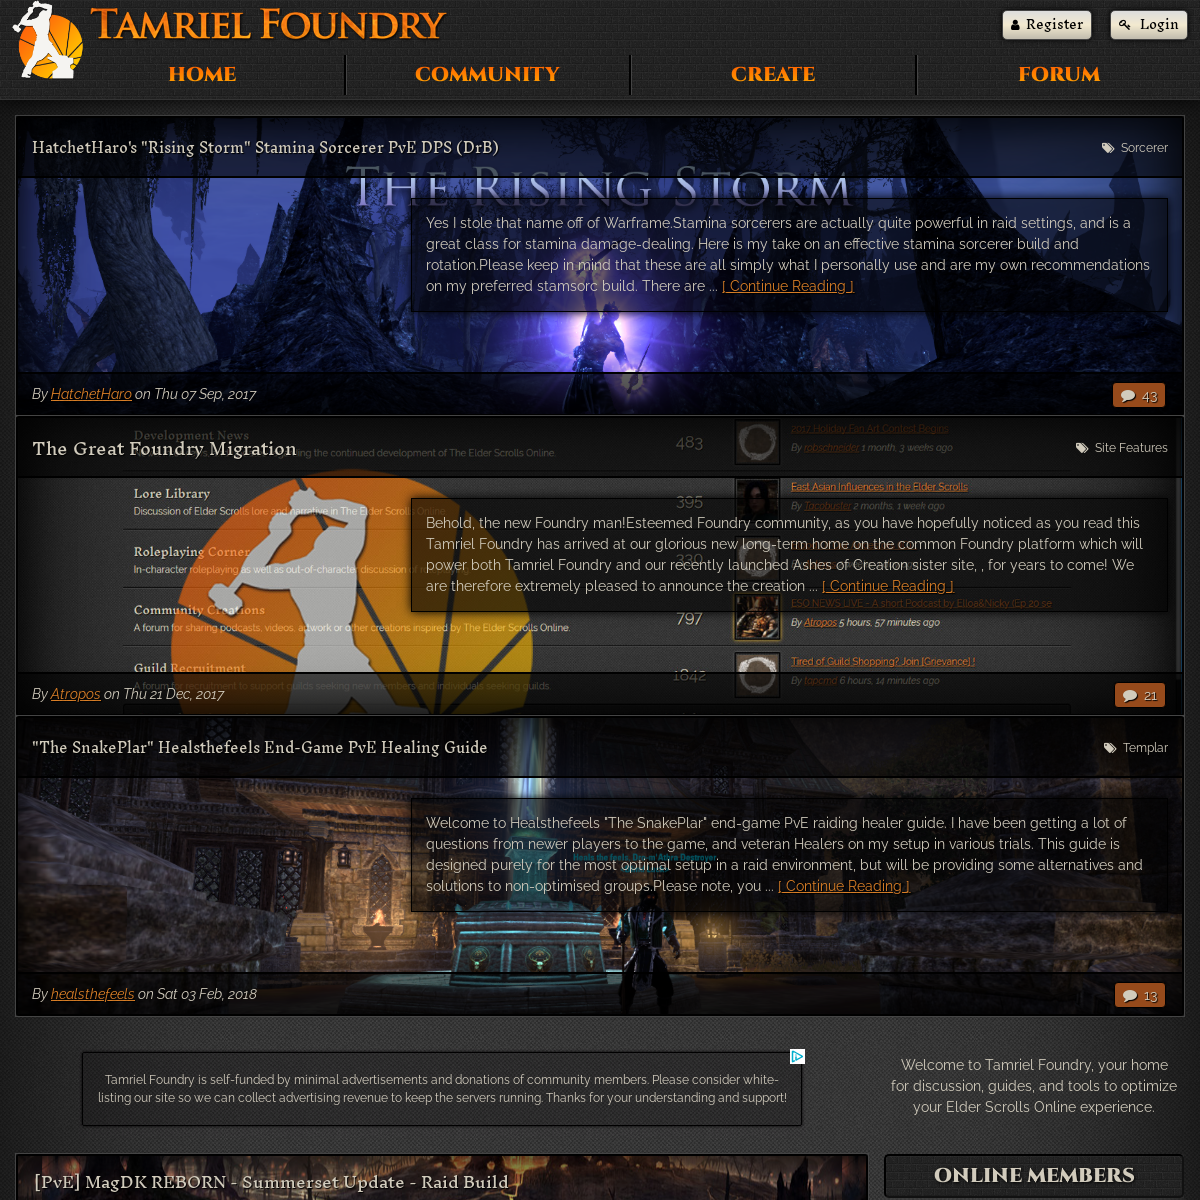 A complete backup of tamrielfoundry.com